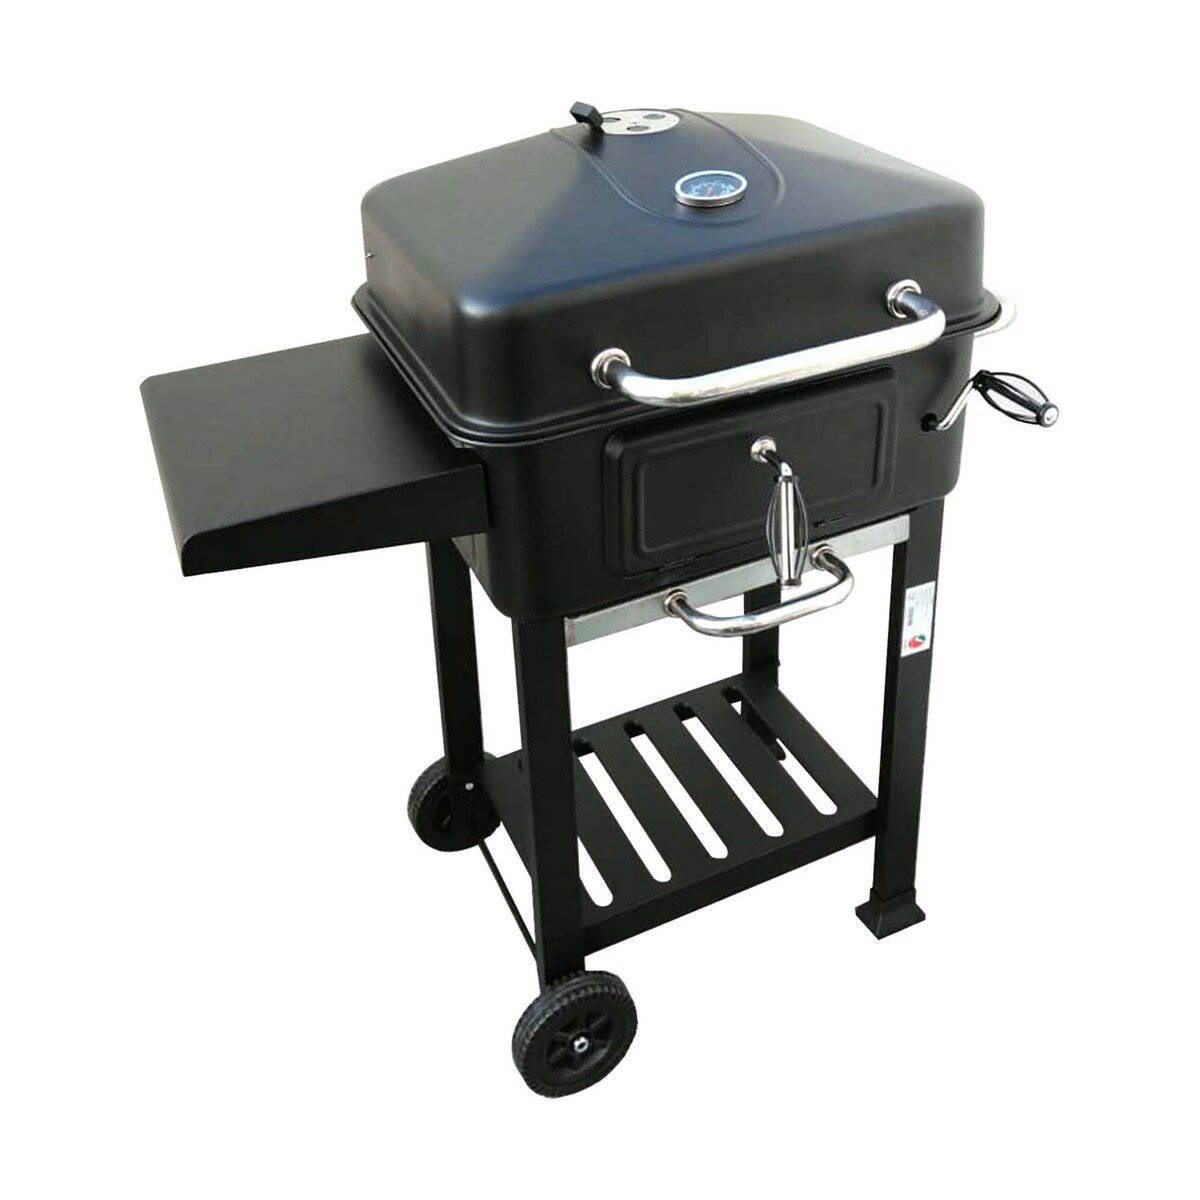 Relax Barbecue Charcoal Grill